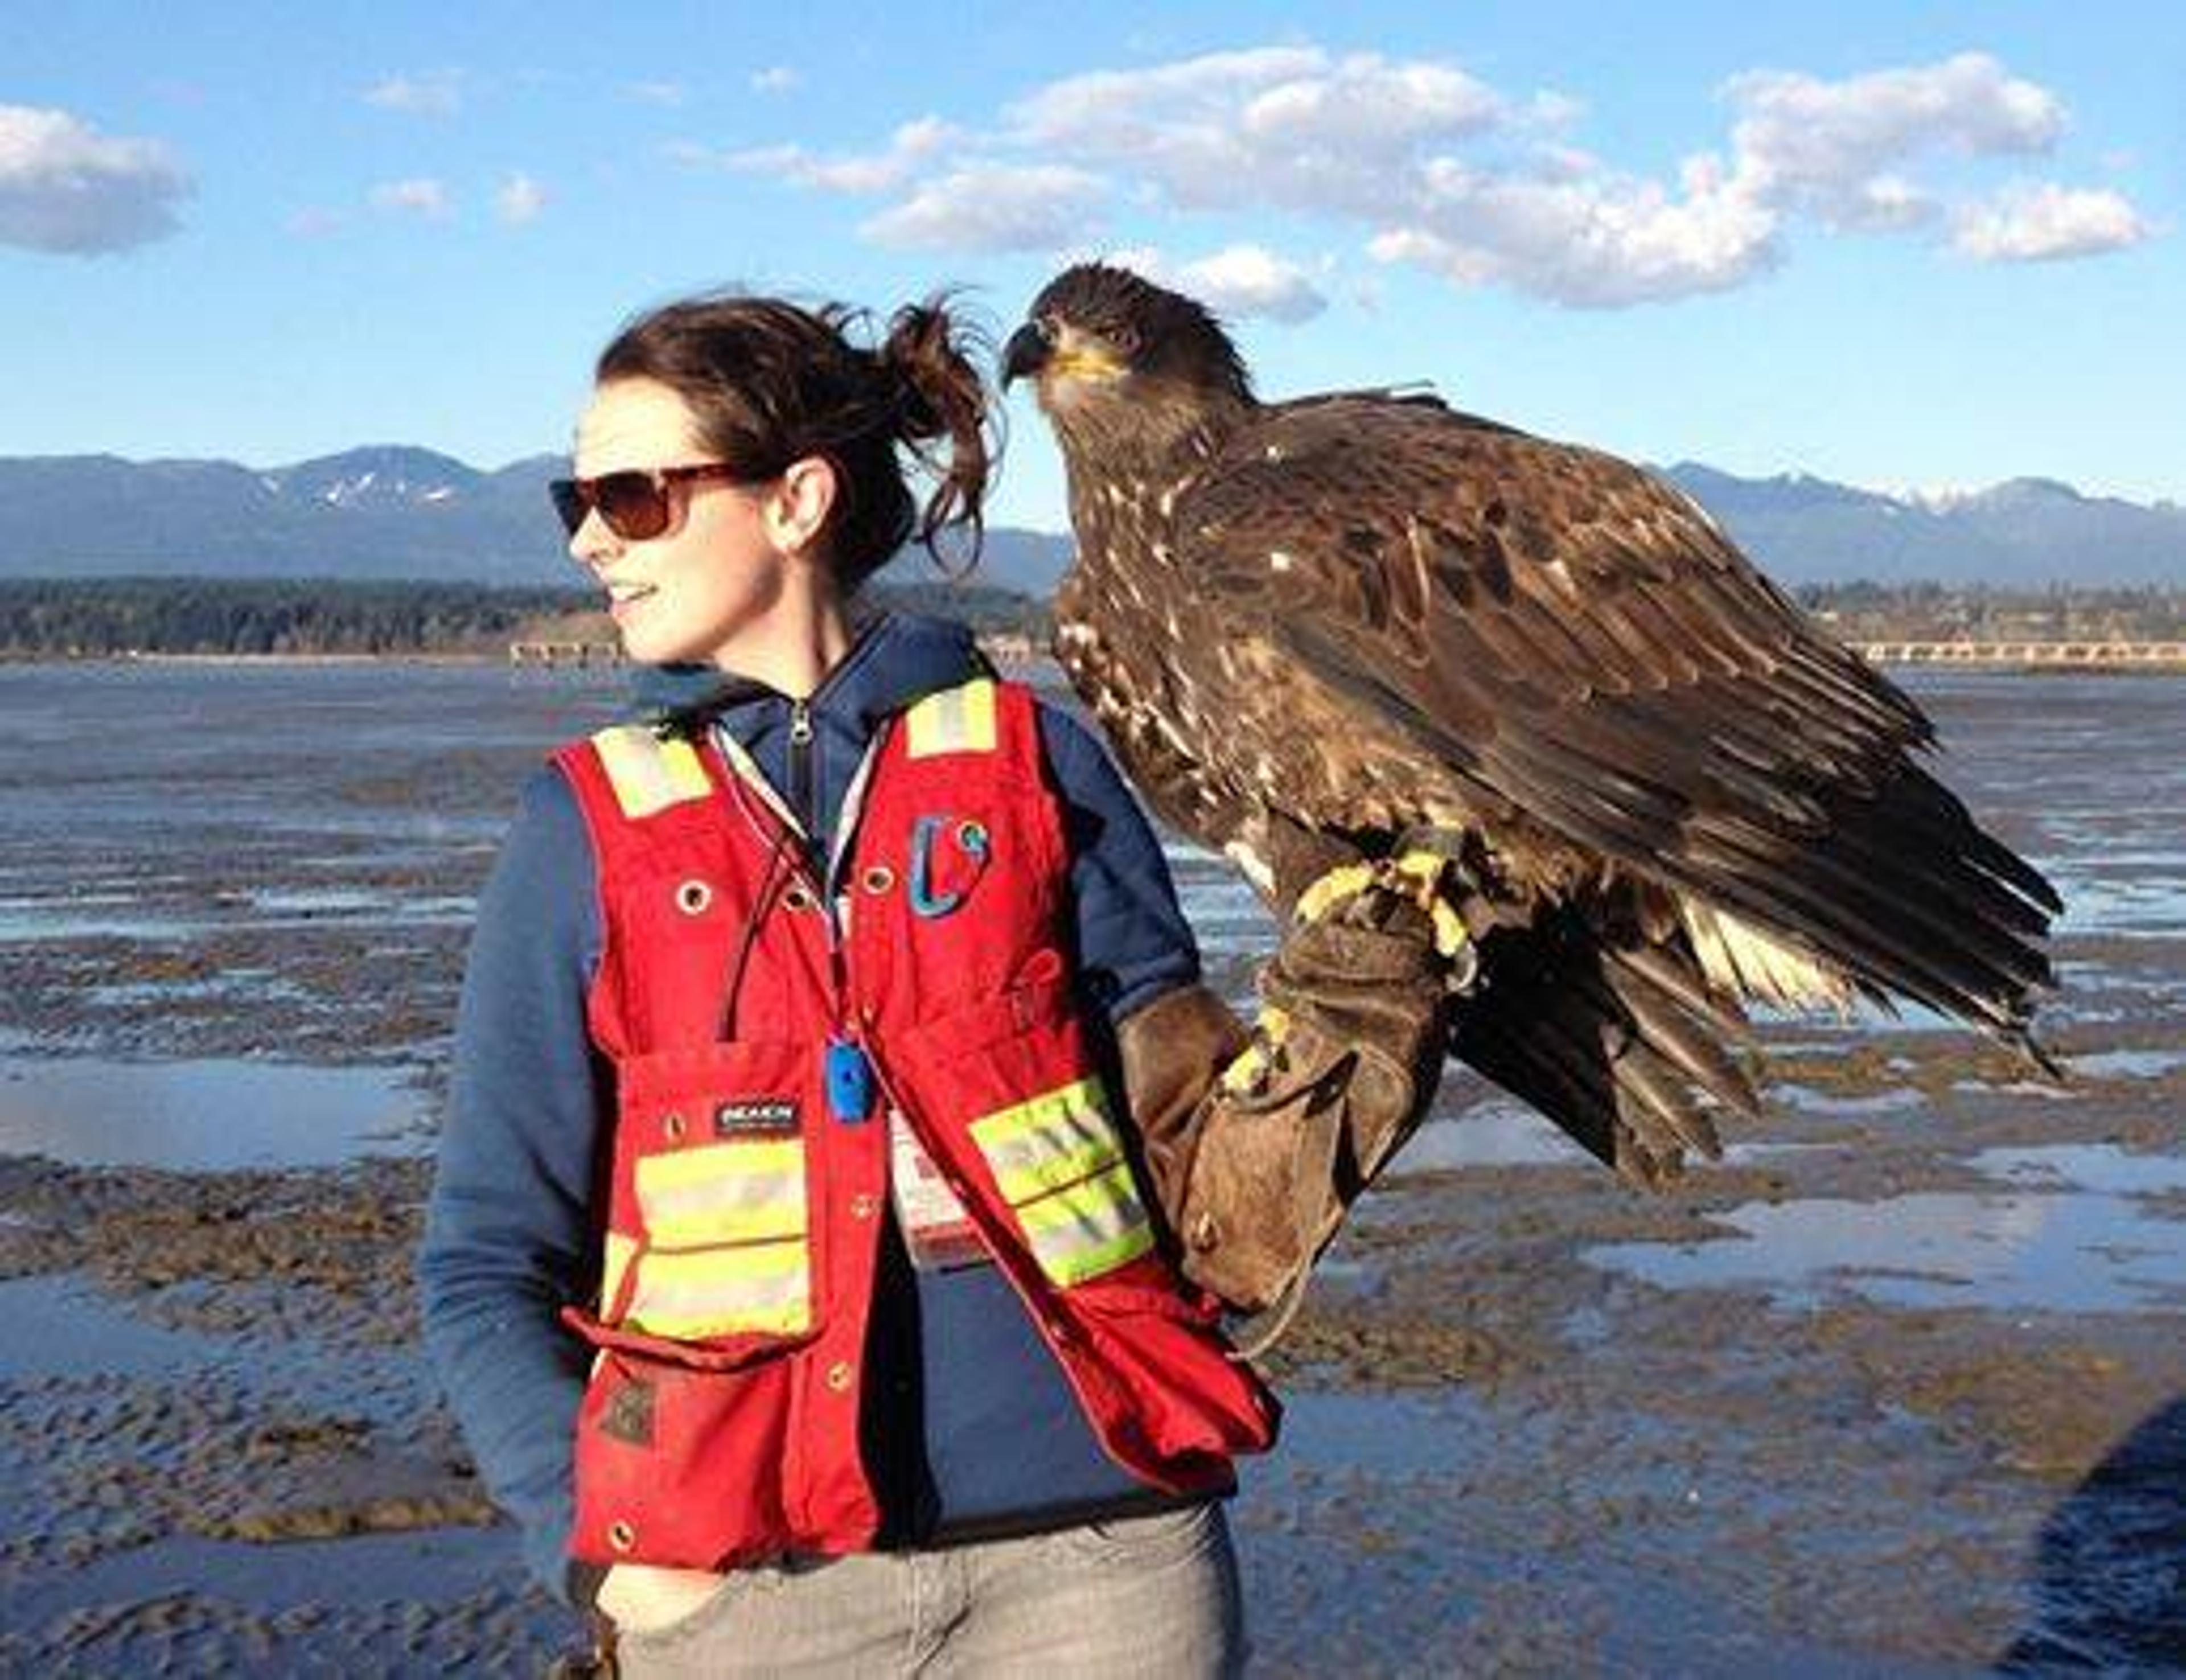 Raptors employee on a beach with an eagle on her glove